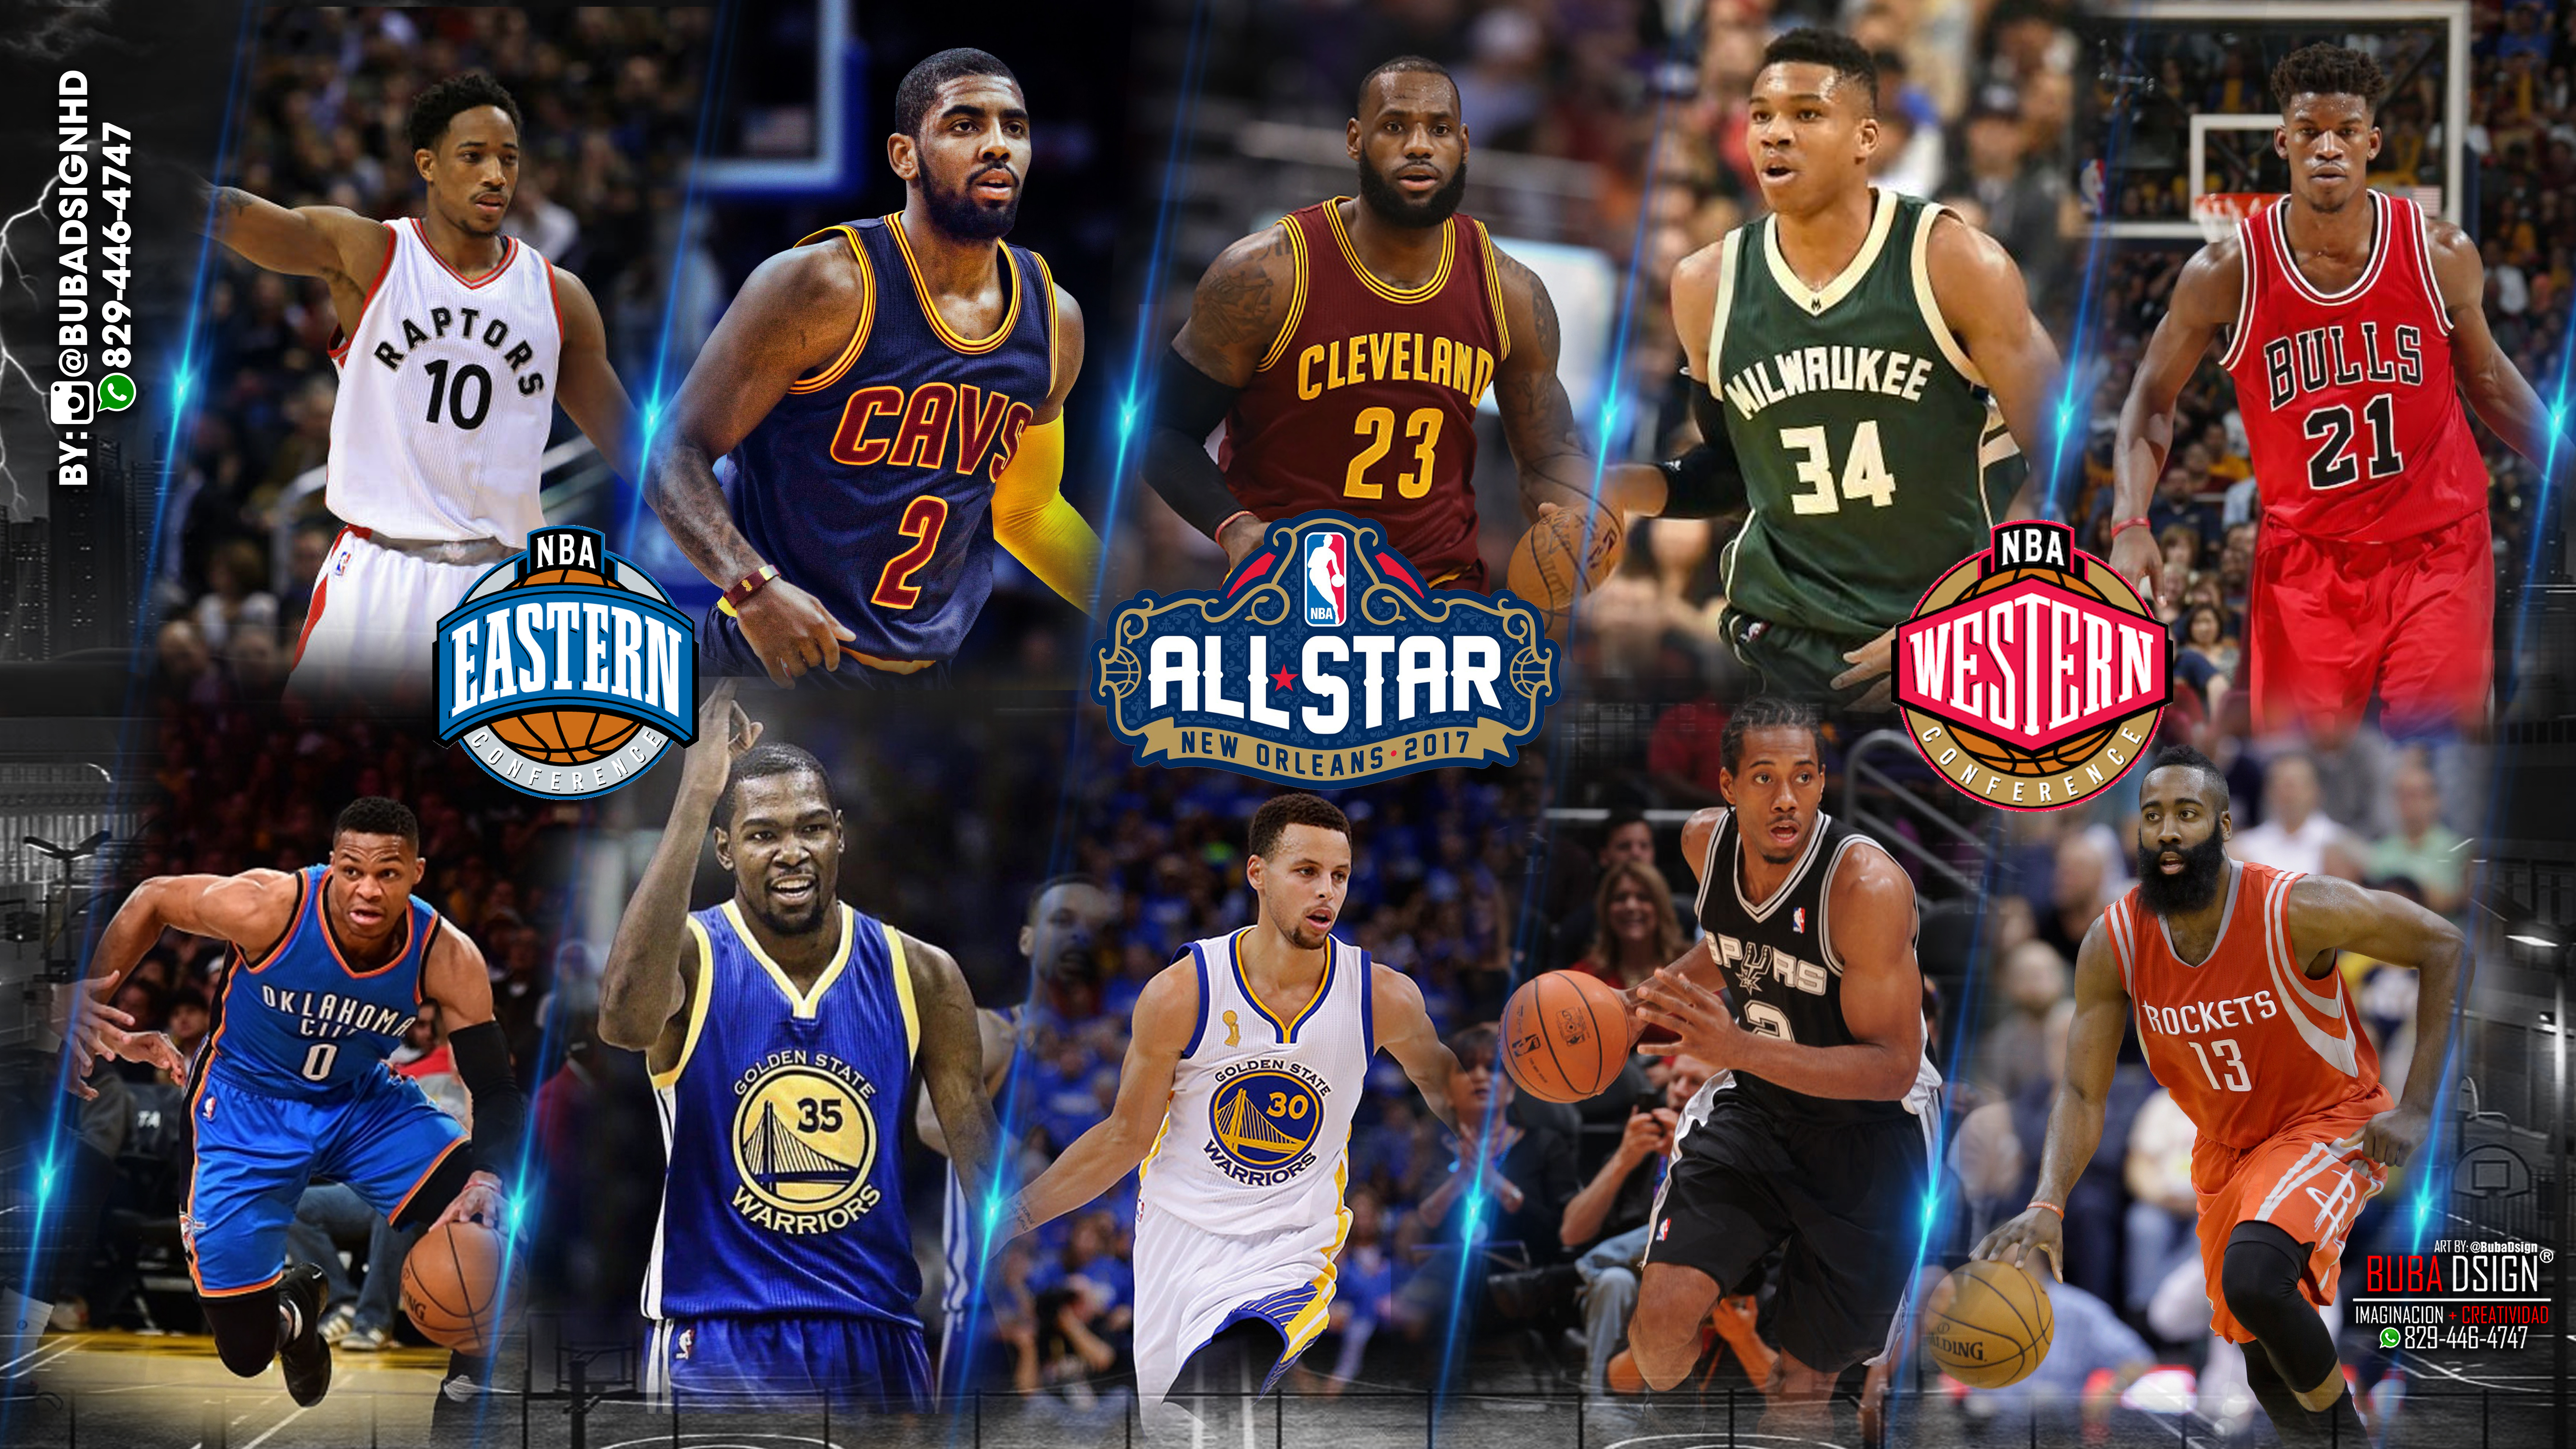 Nba All Star 2017 Related Keywords Suggestions   Nba All Star 2017 Long Tail Keywords